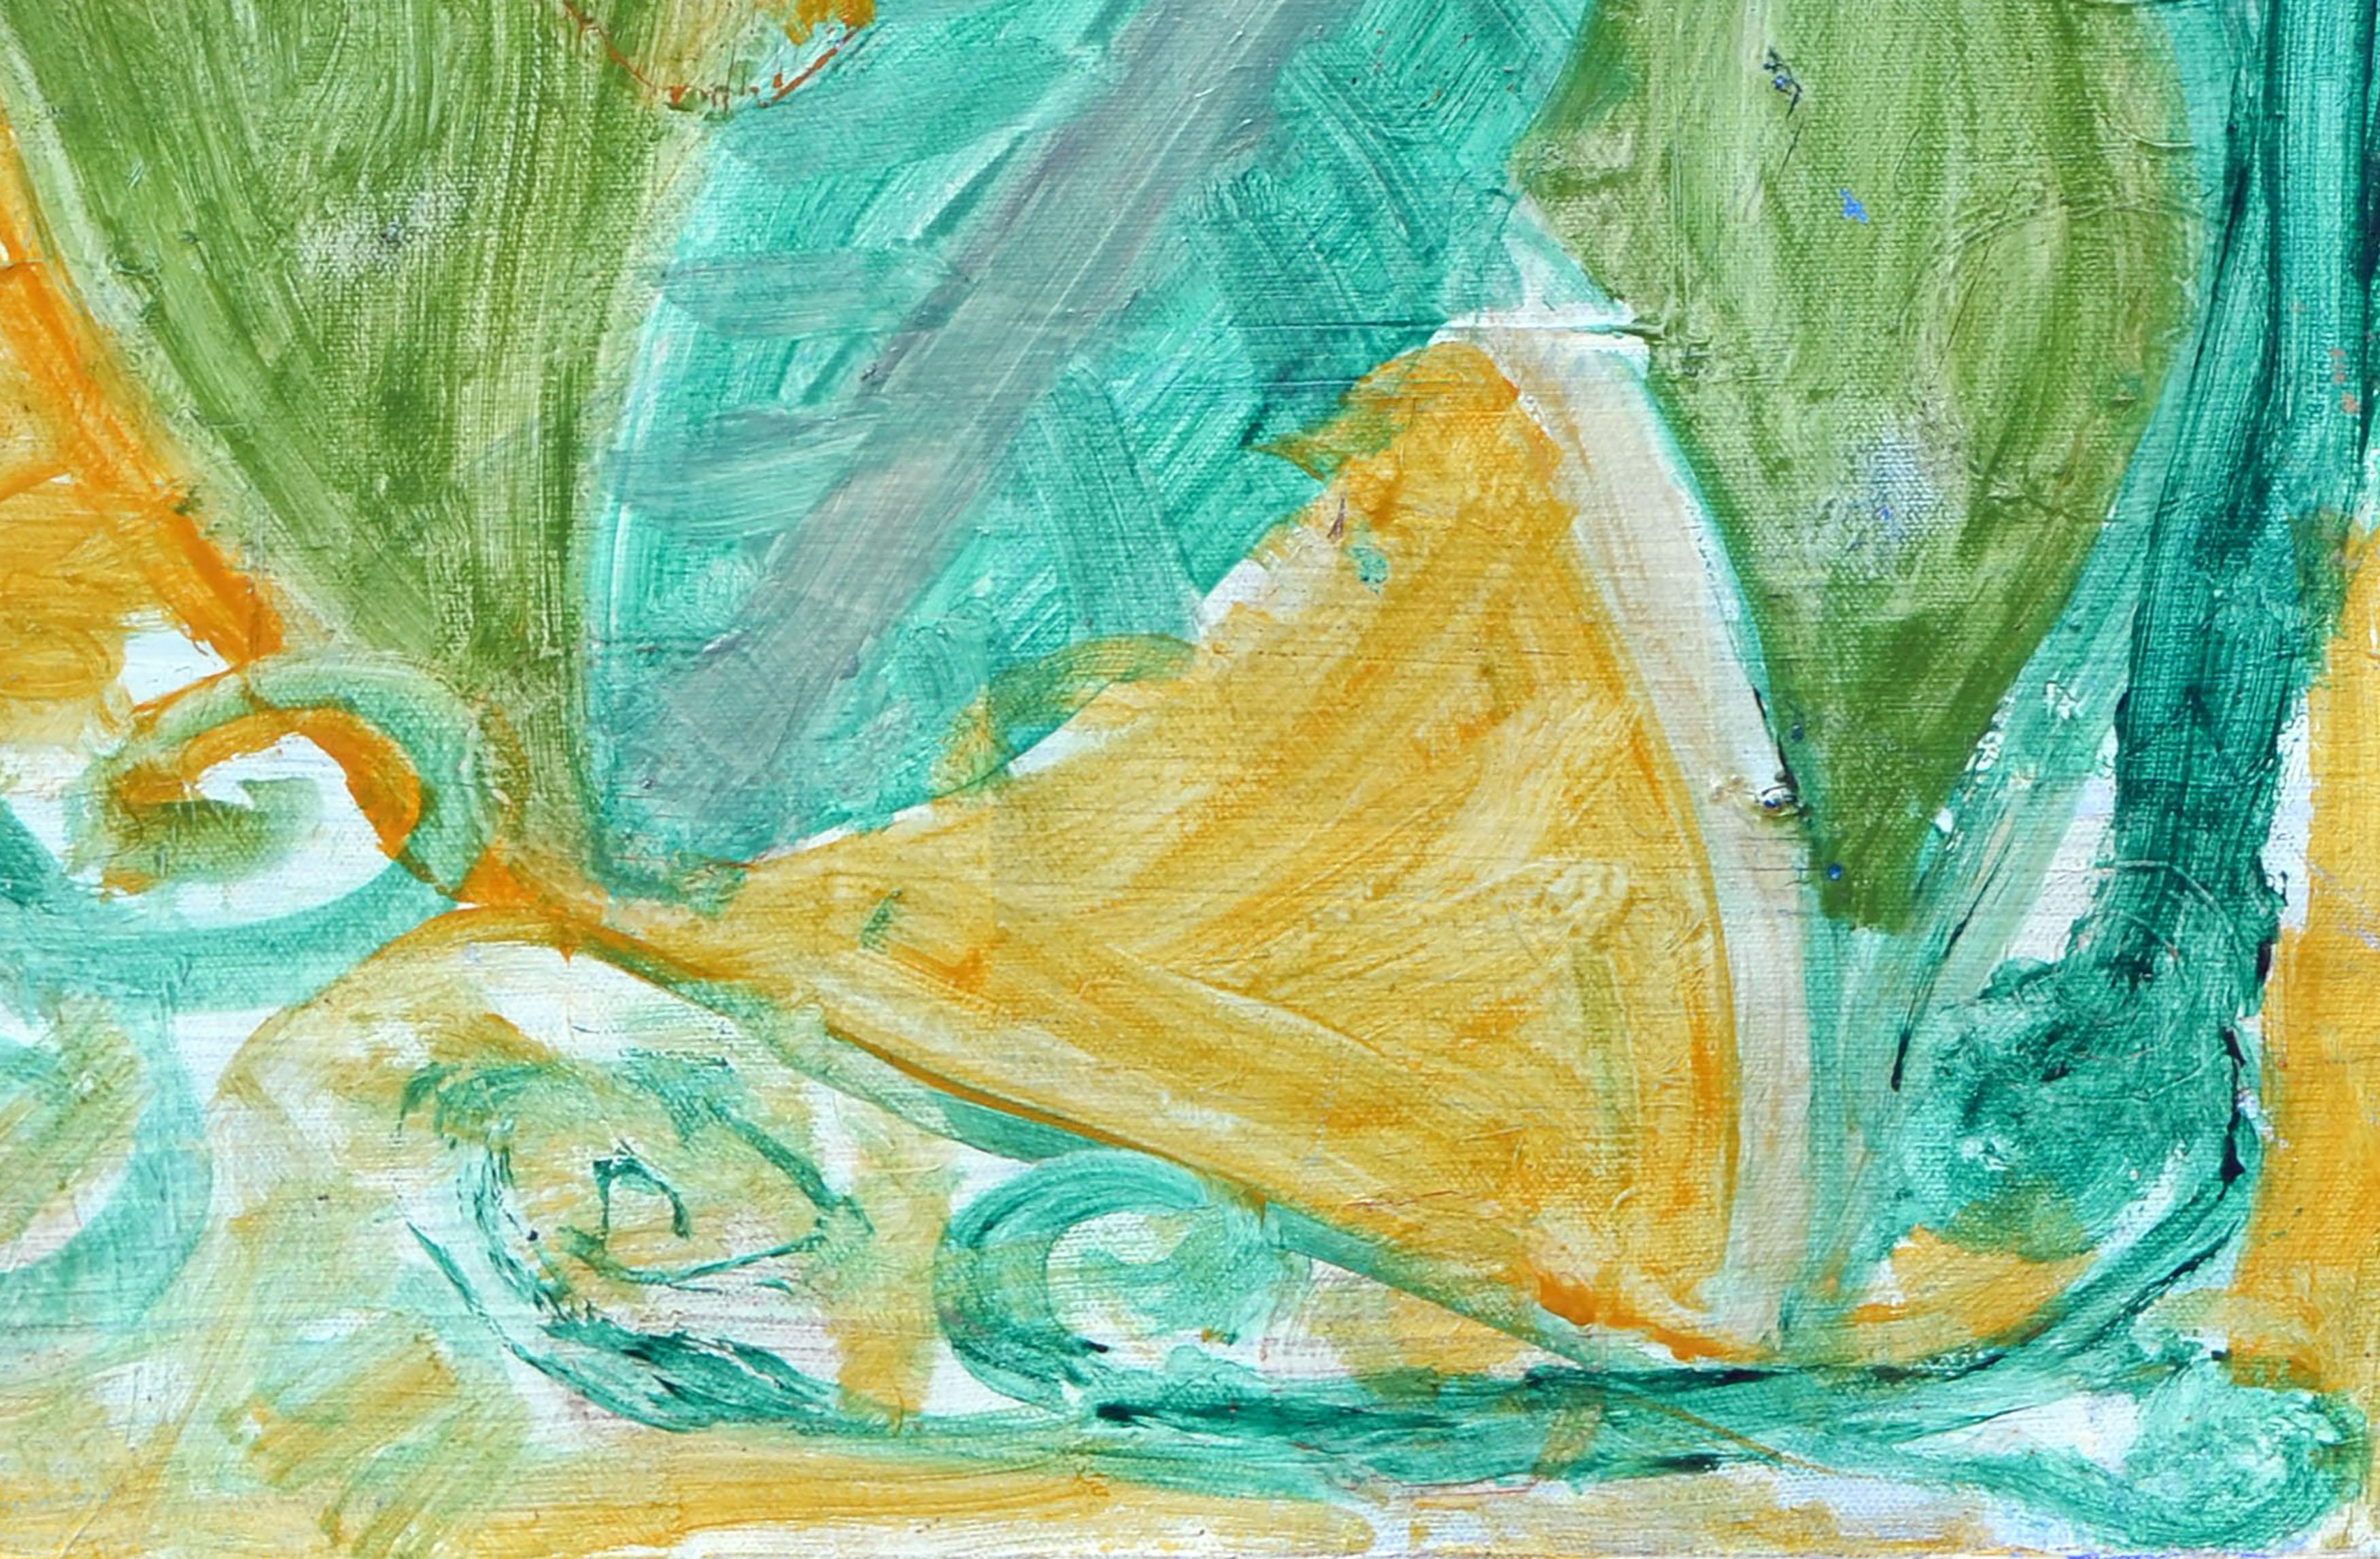 In the Garden Abstract Expressionist - Green Abstract Painting by Kristin Cohen